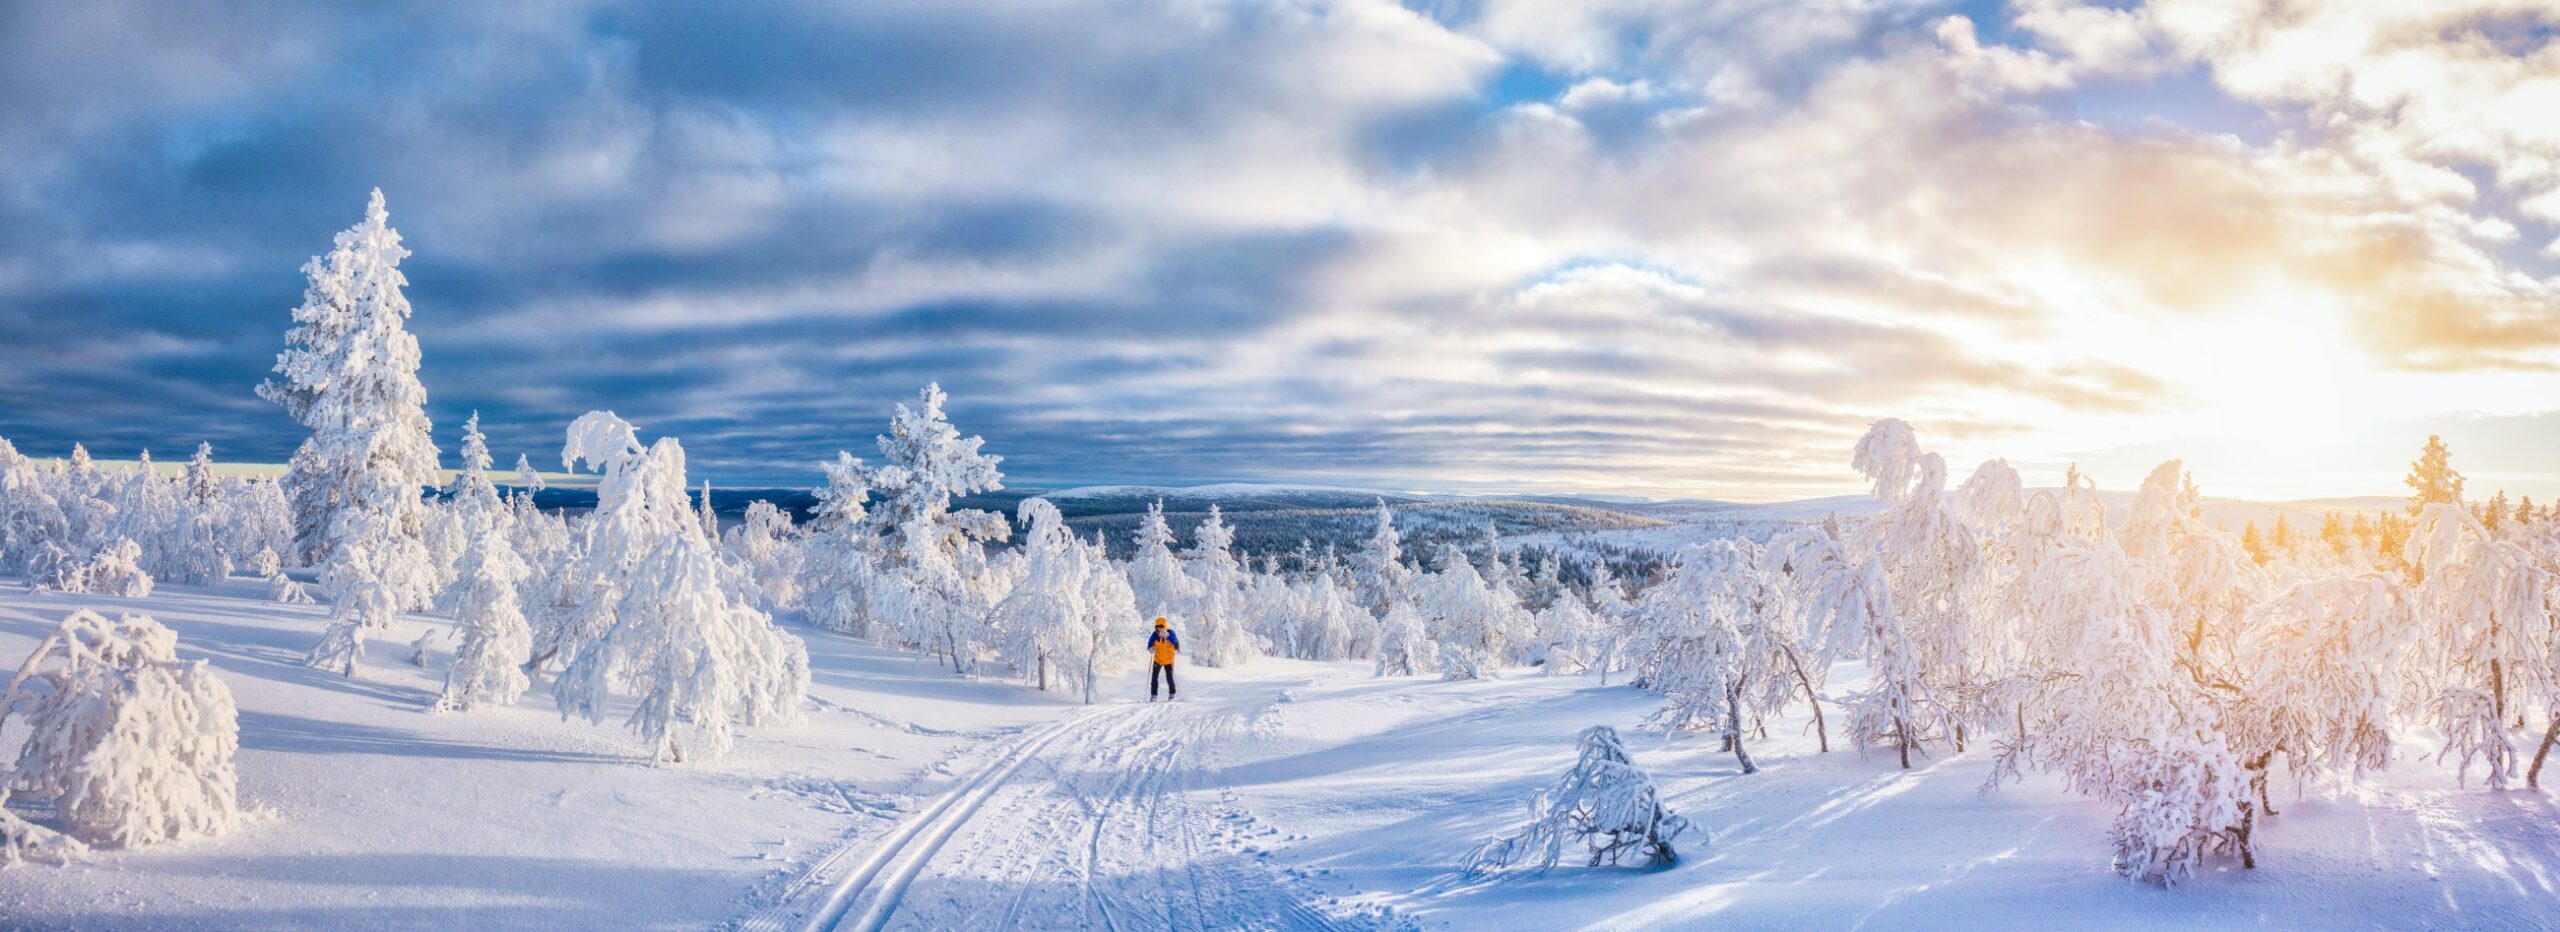 Lapland: Christmas All Year Round! Best Things to Do